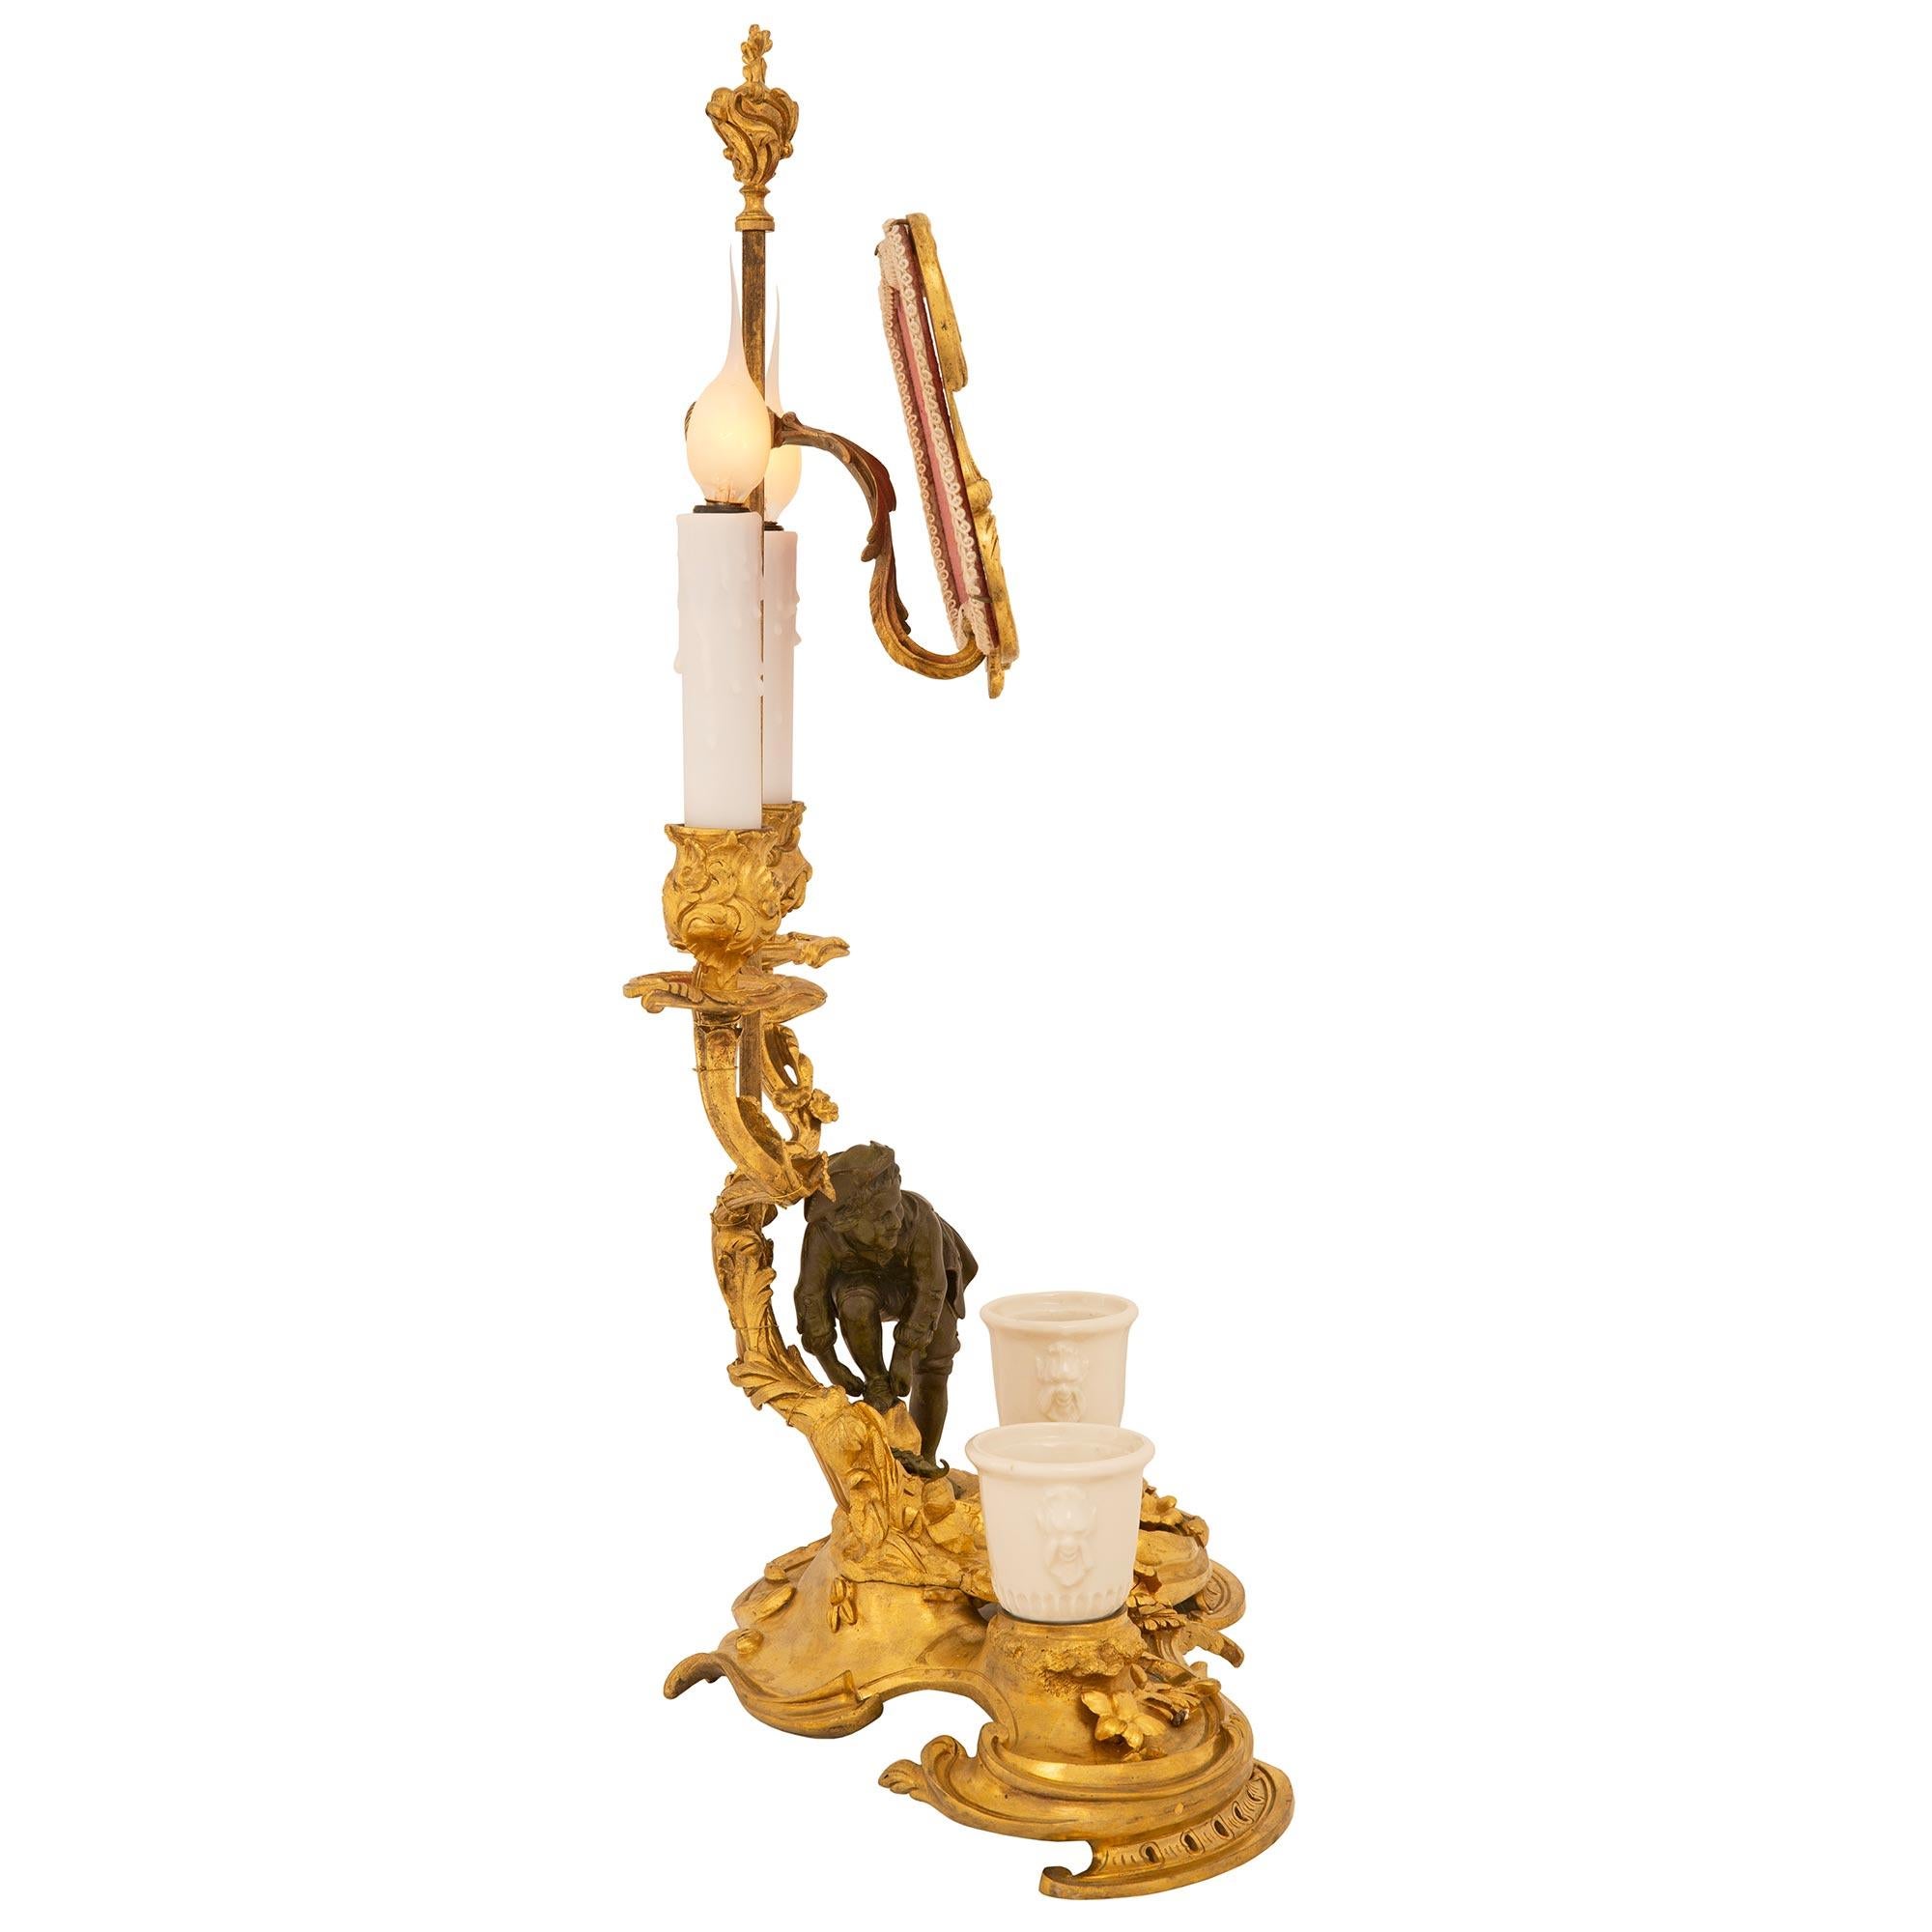 Porcelain French Mid-19th Century Louis XV Style Ormolu Candelabra Lamp For Sale